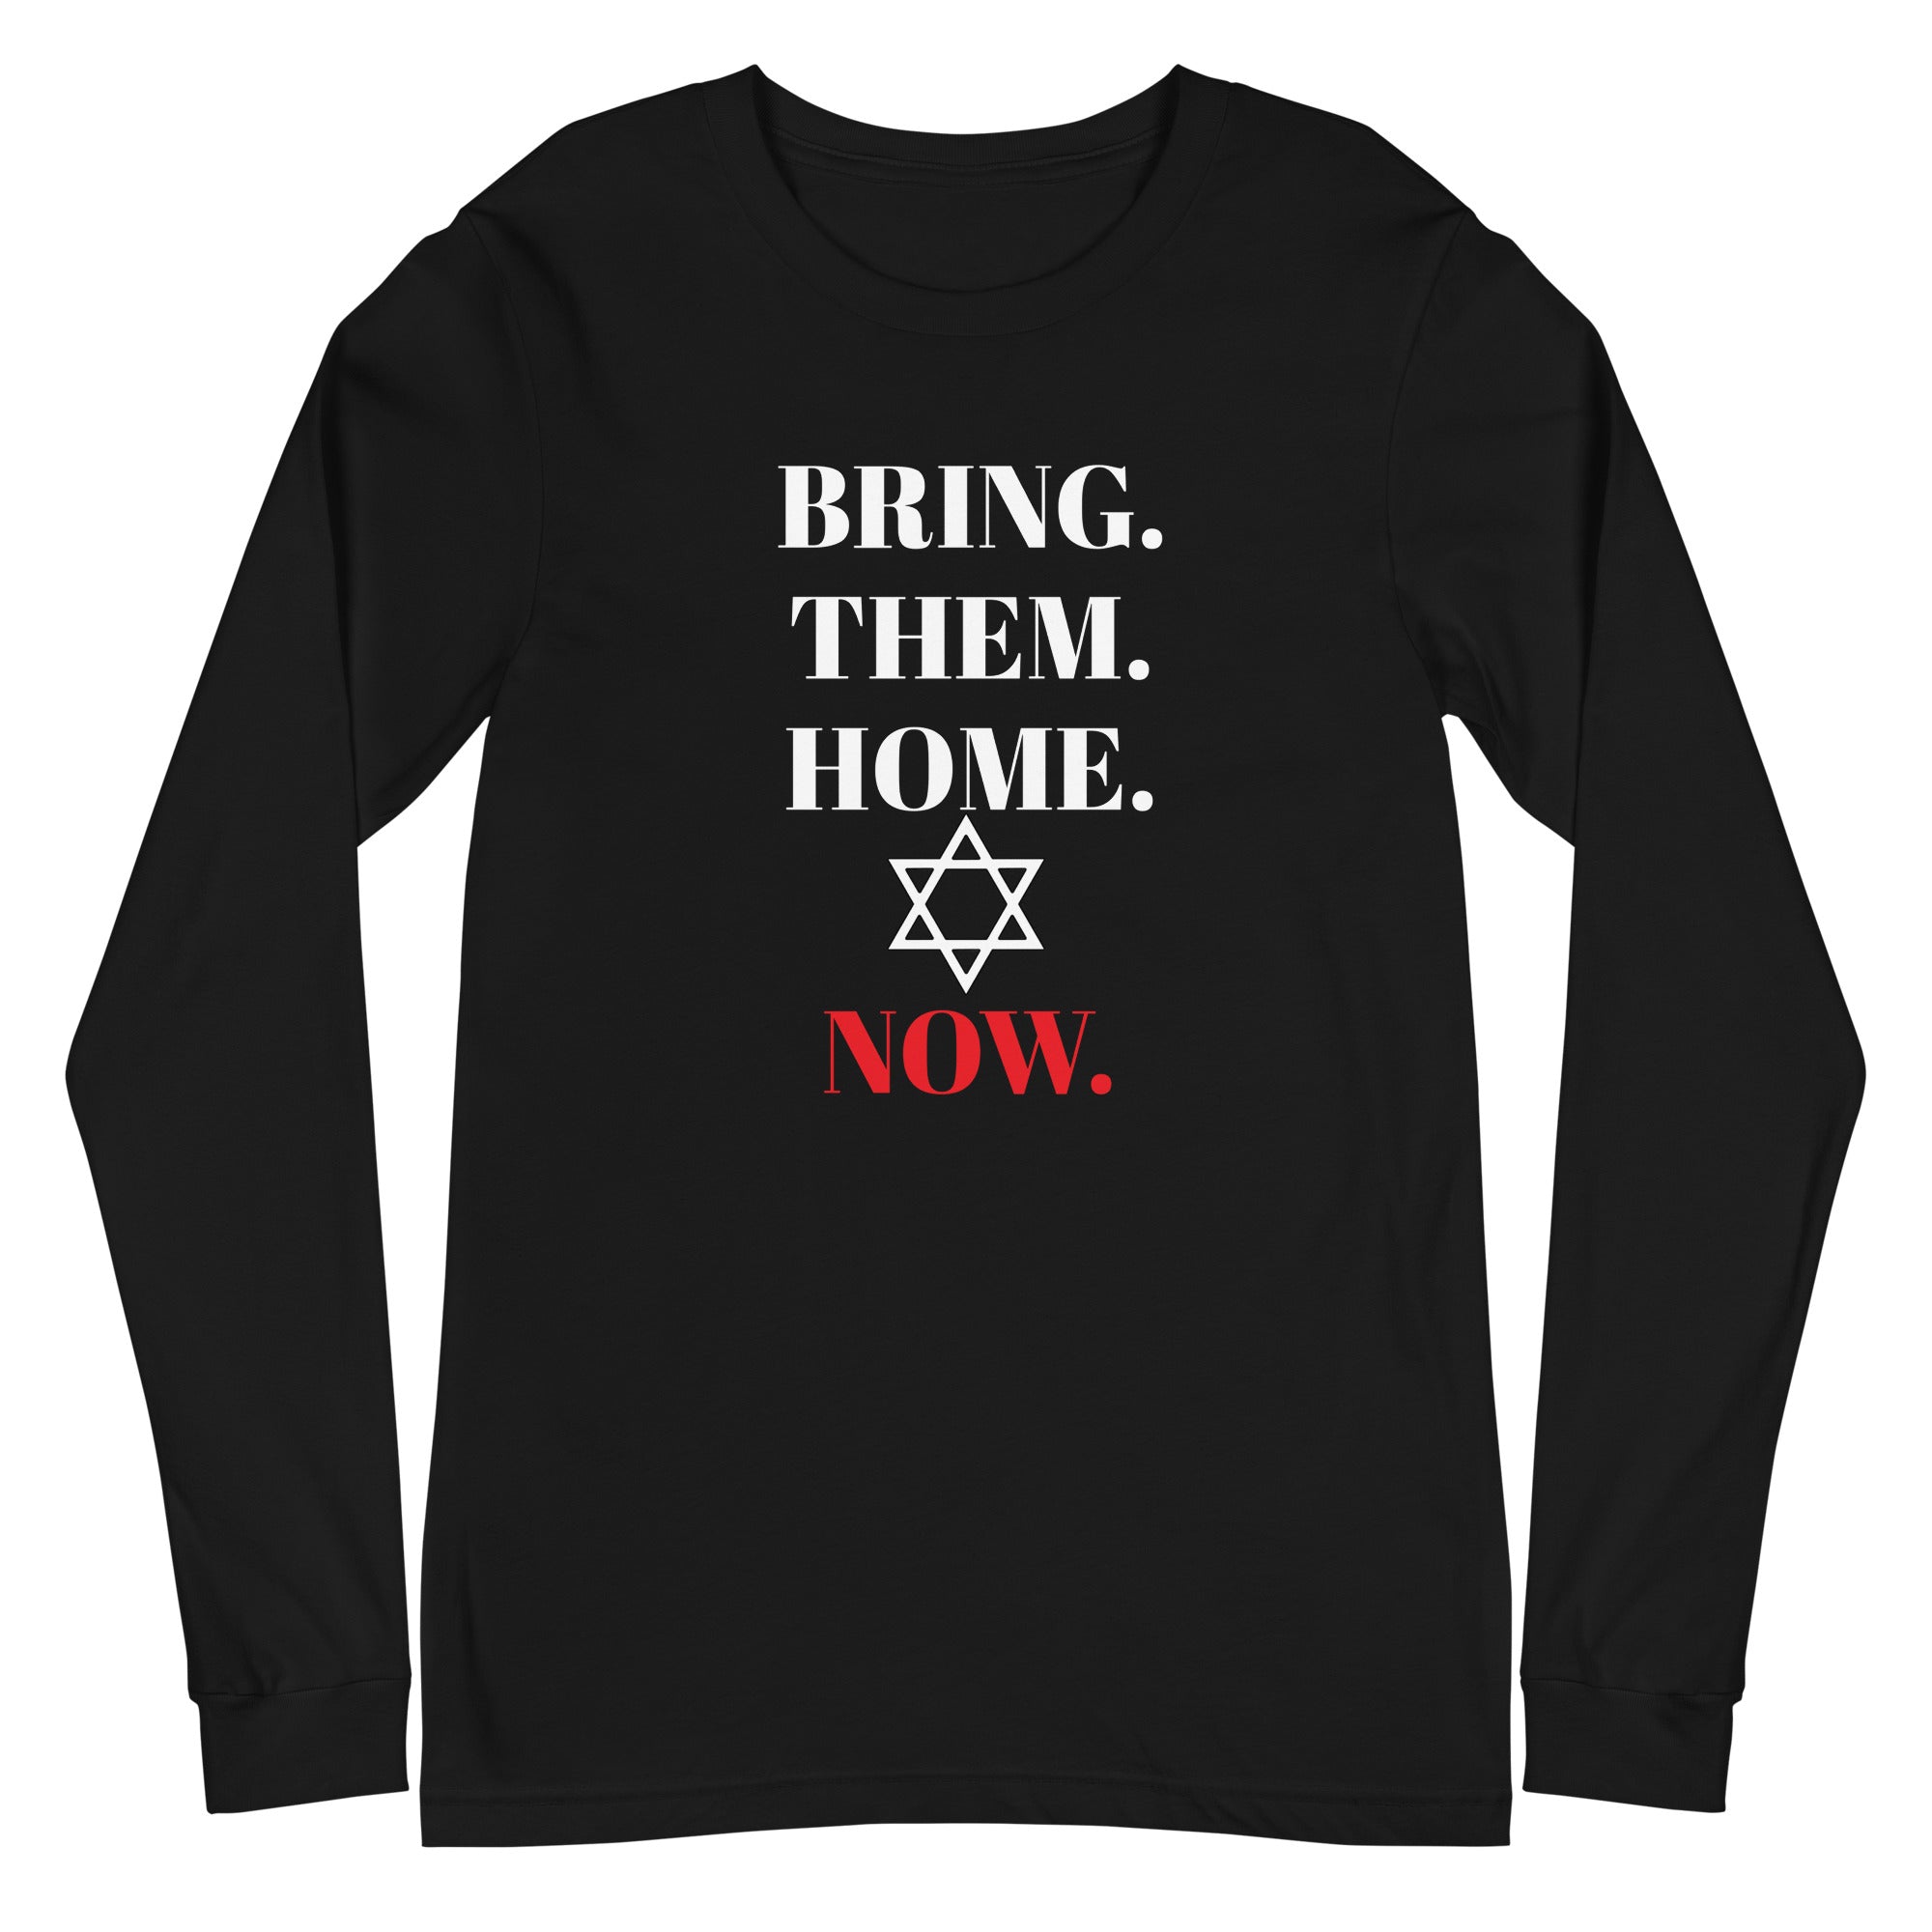 Bring Them Home Now - Unisex Long Sleeve Tee